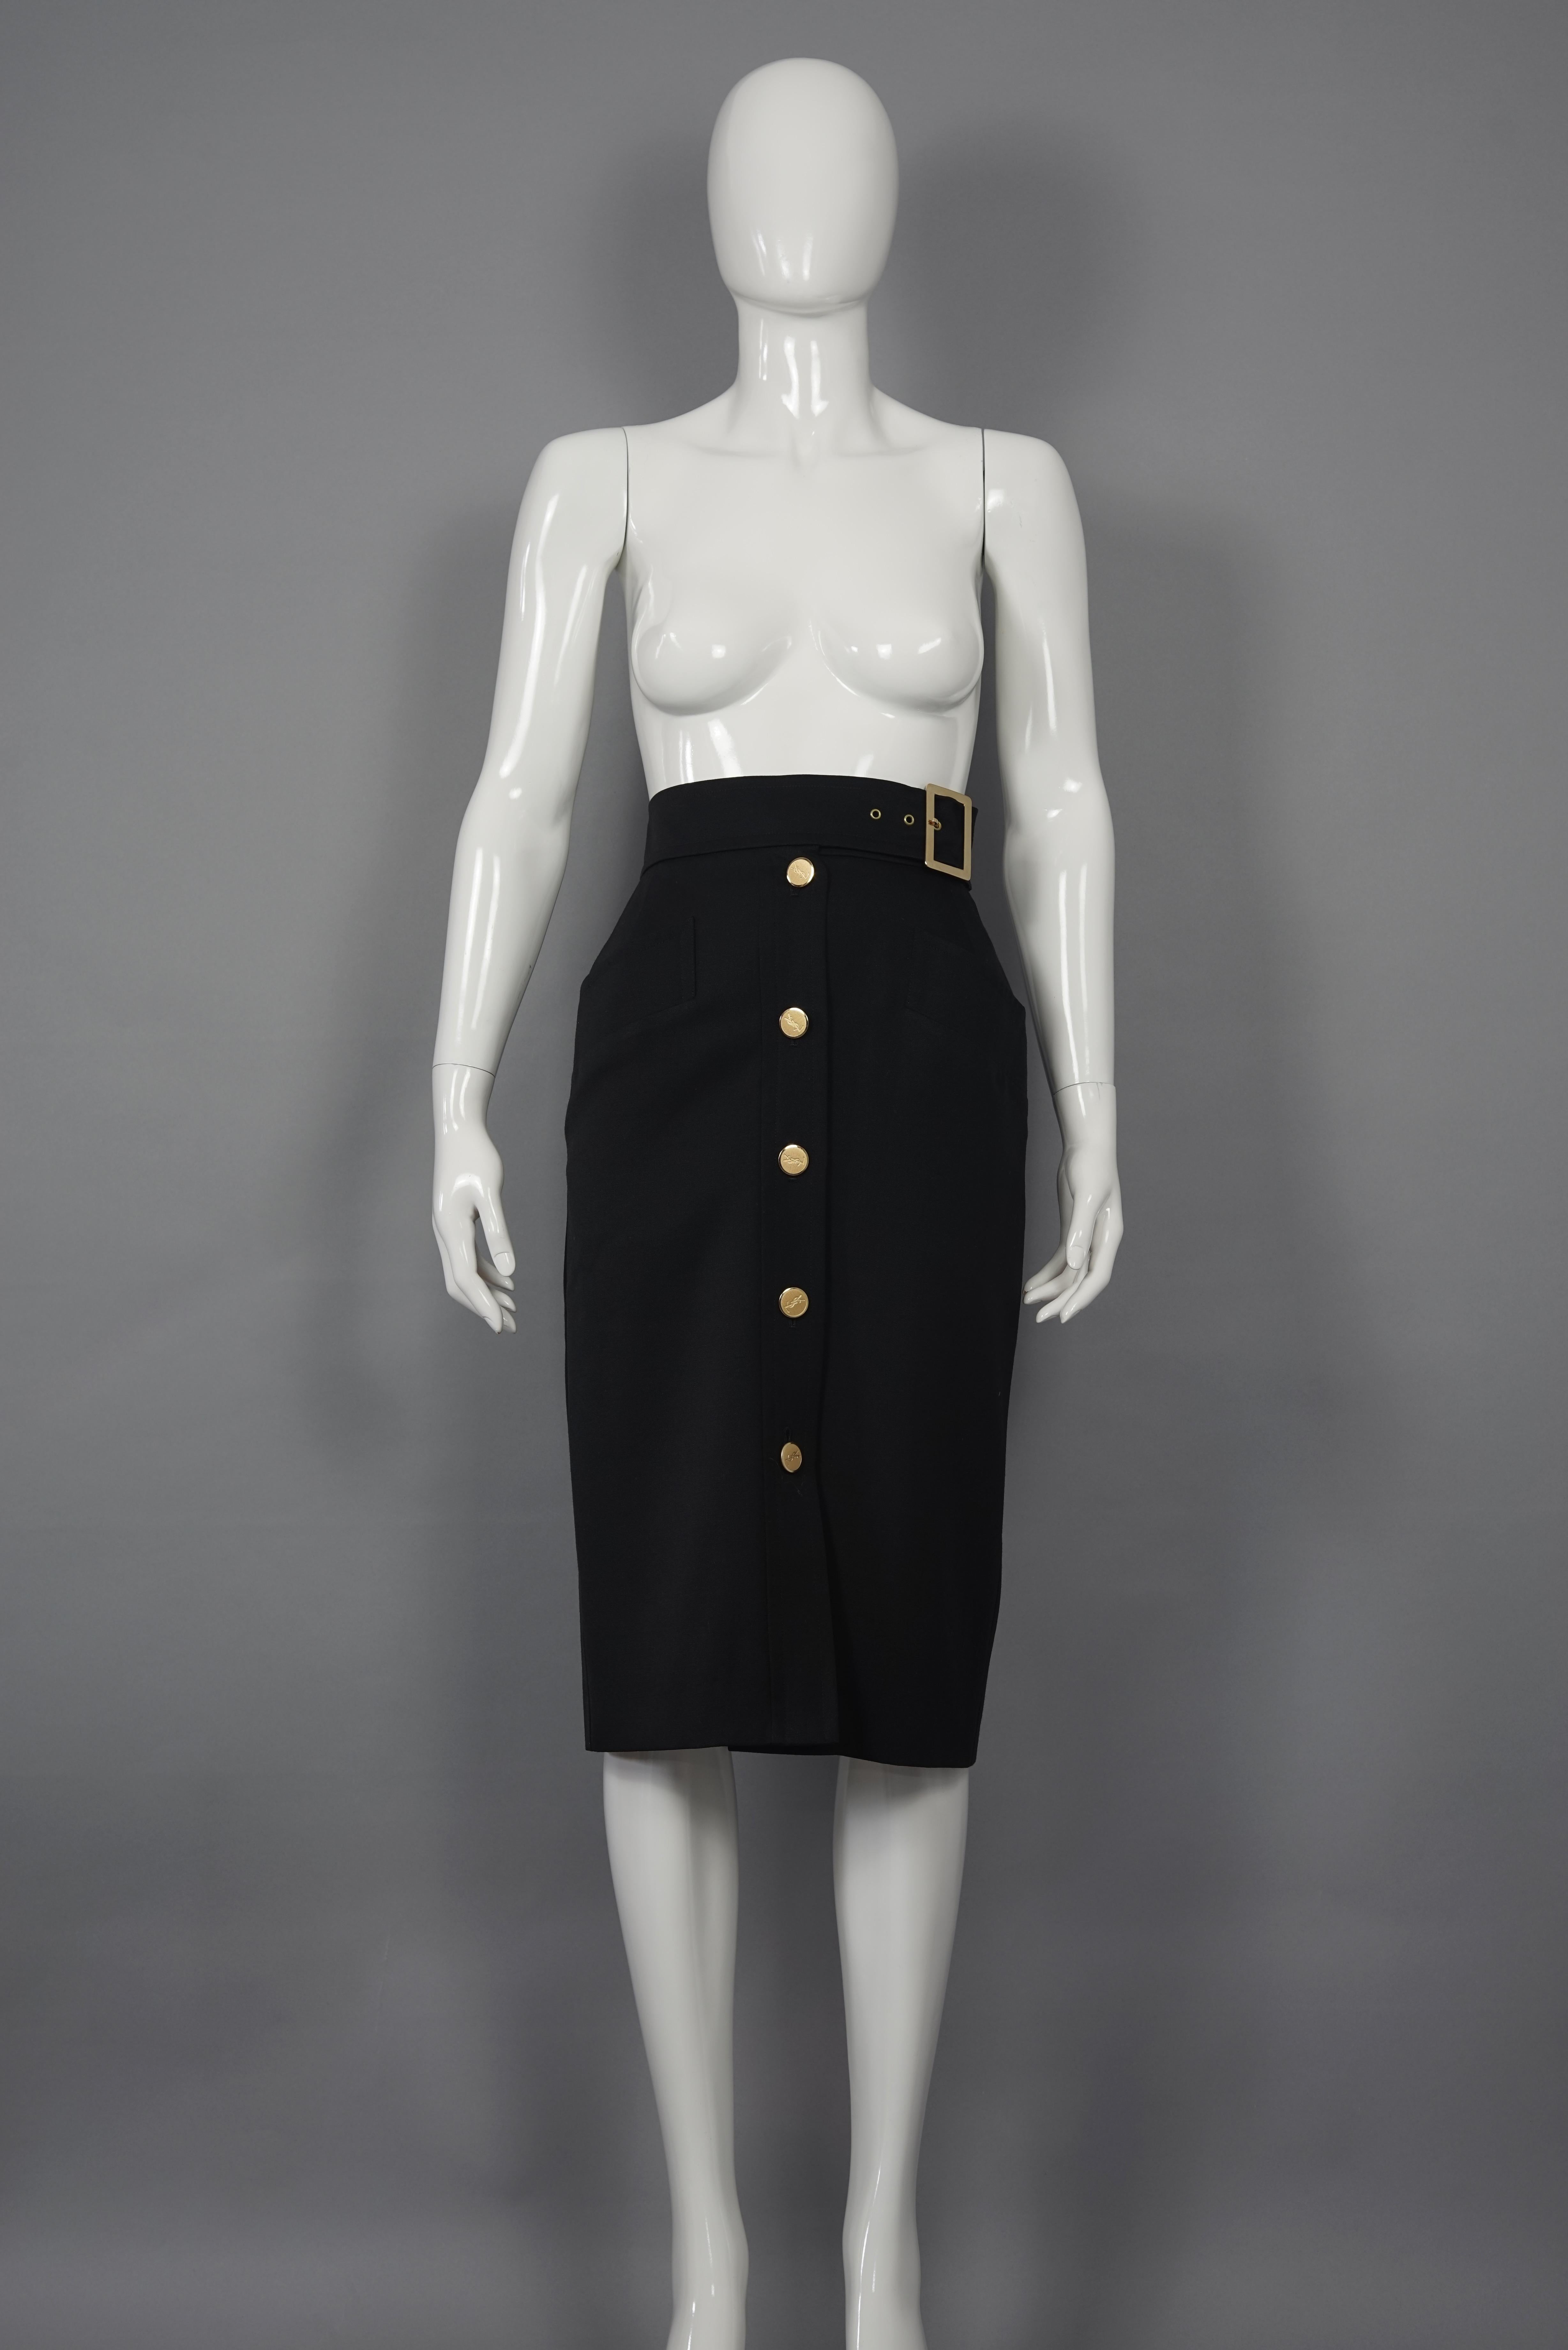 Vintage YVES SAINT LAURENT Ysl Belted Pencil Skirt

Measurements taken laid flat, please double waist and hips:
Waist: 12.59 inches (32 cm)
Hips: 17 inches (43.18 cm)
Length: 27.95 inches (71 cm)
Belt: 2.16 inches (5.5 cm)

Features:
- 100%